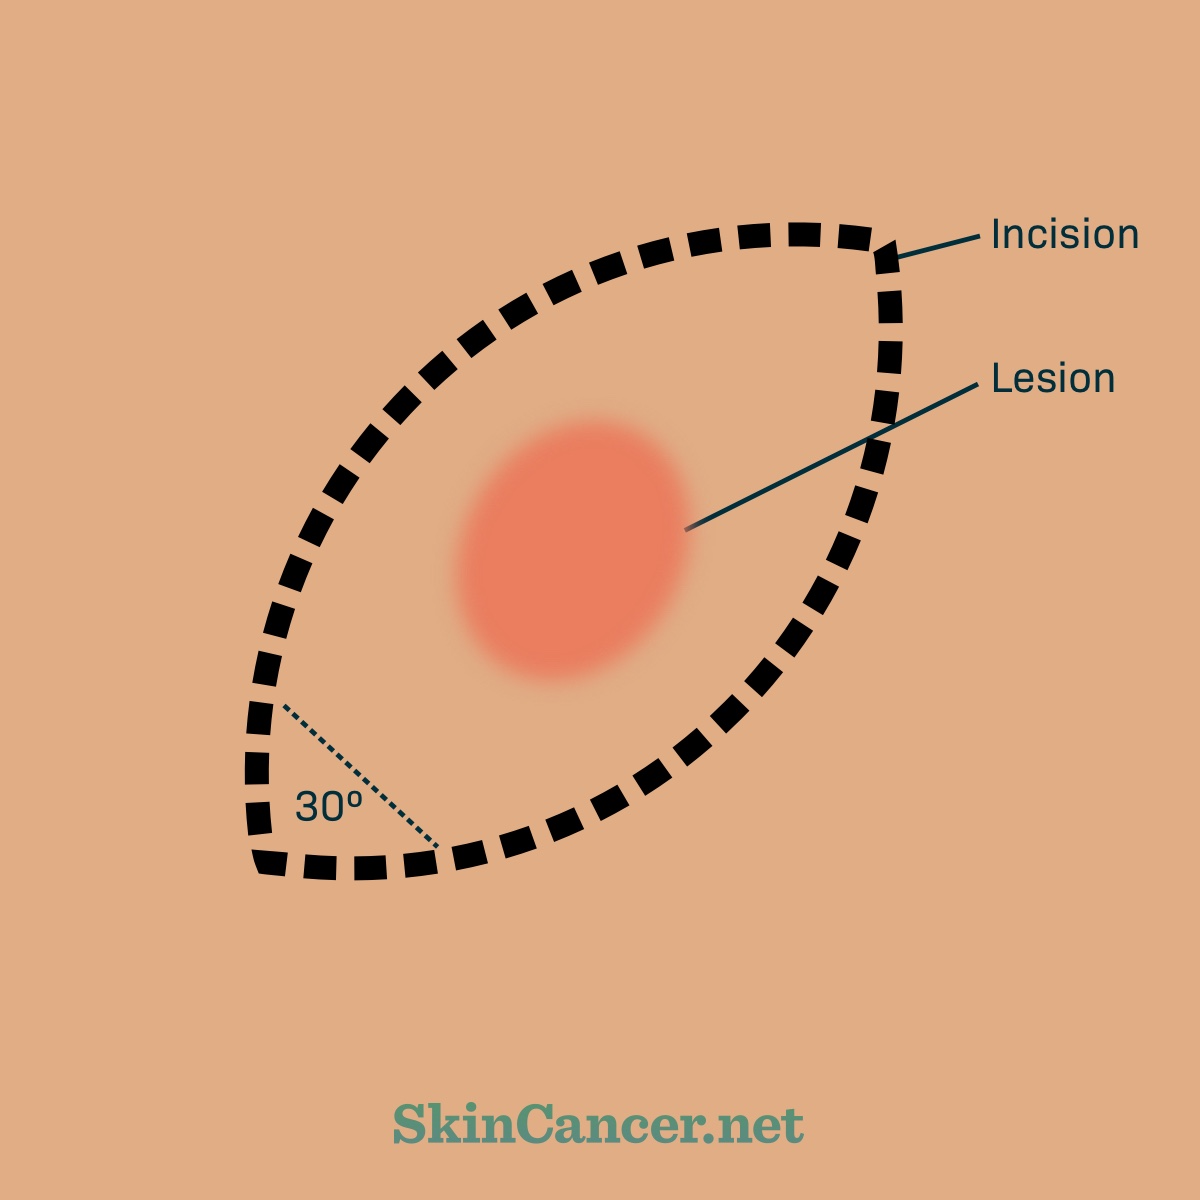 An almond shaped dotted line, the incision, surrounds a red circle, the lesion